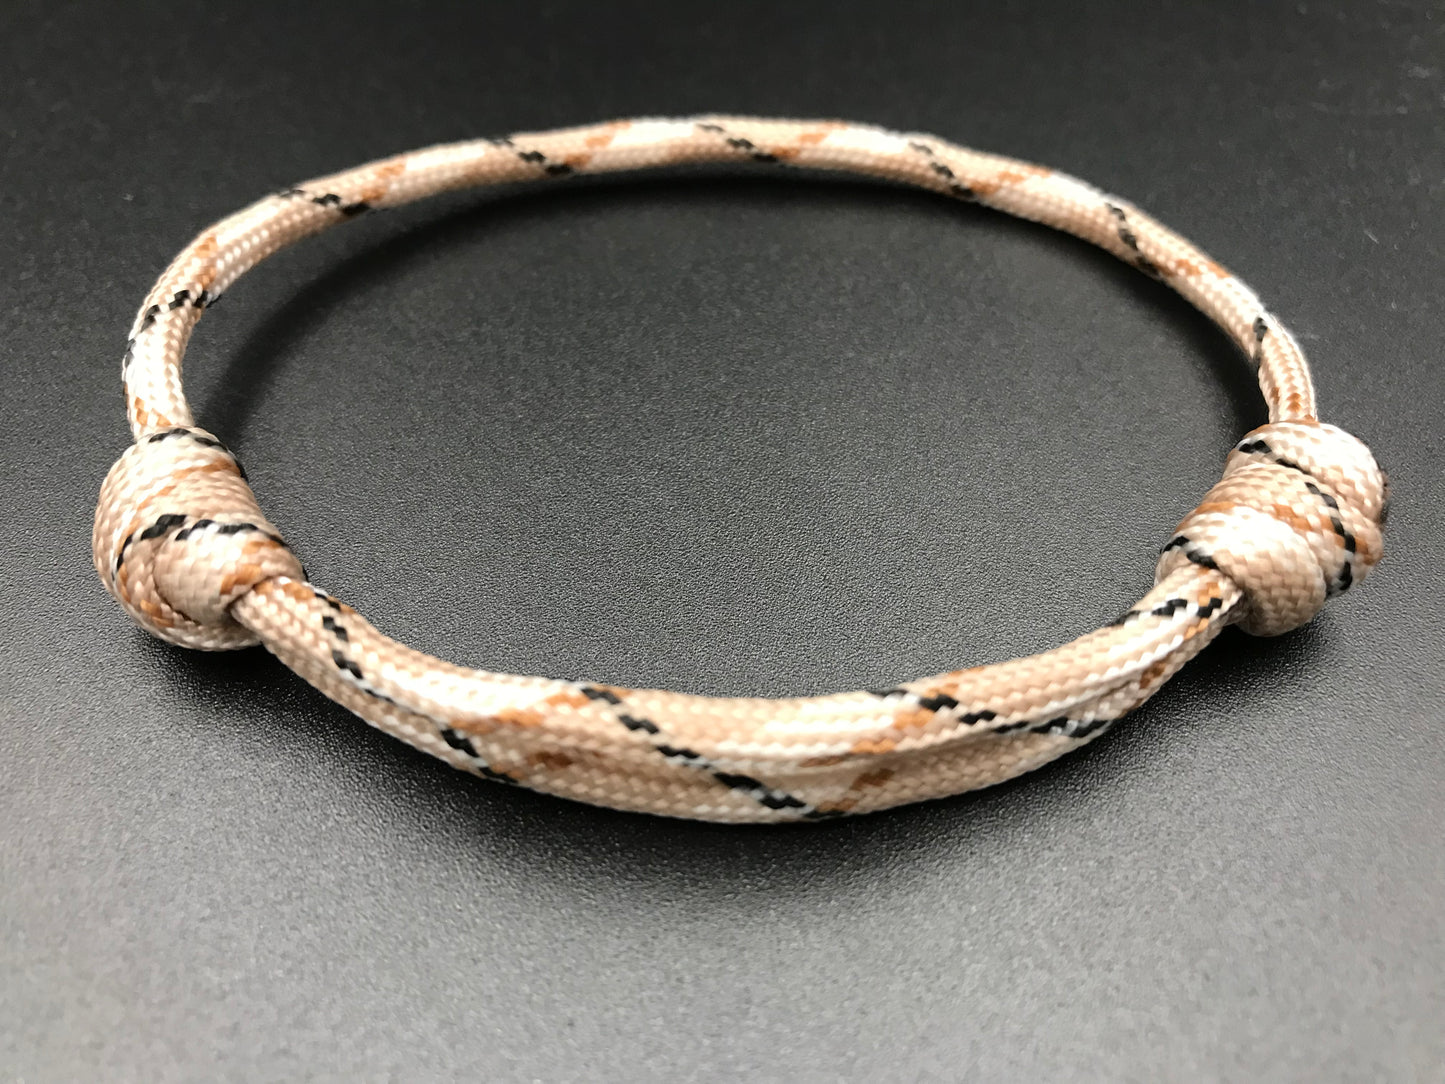 Paracord friendship bracelet in Desert camo ( light brown medium brown military camo mixes) light weight and fully adjustable 